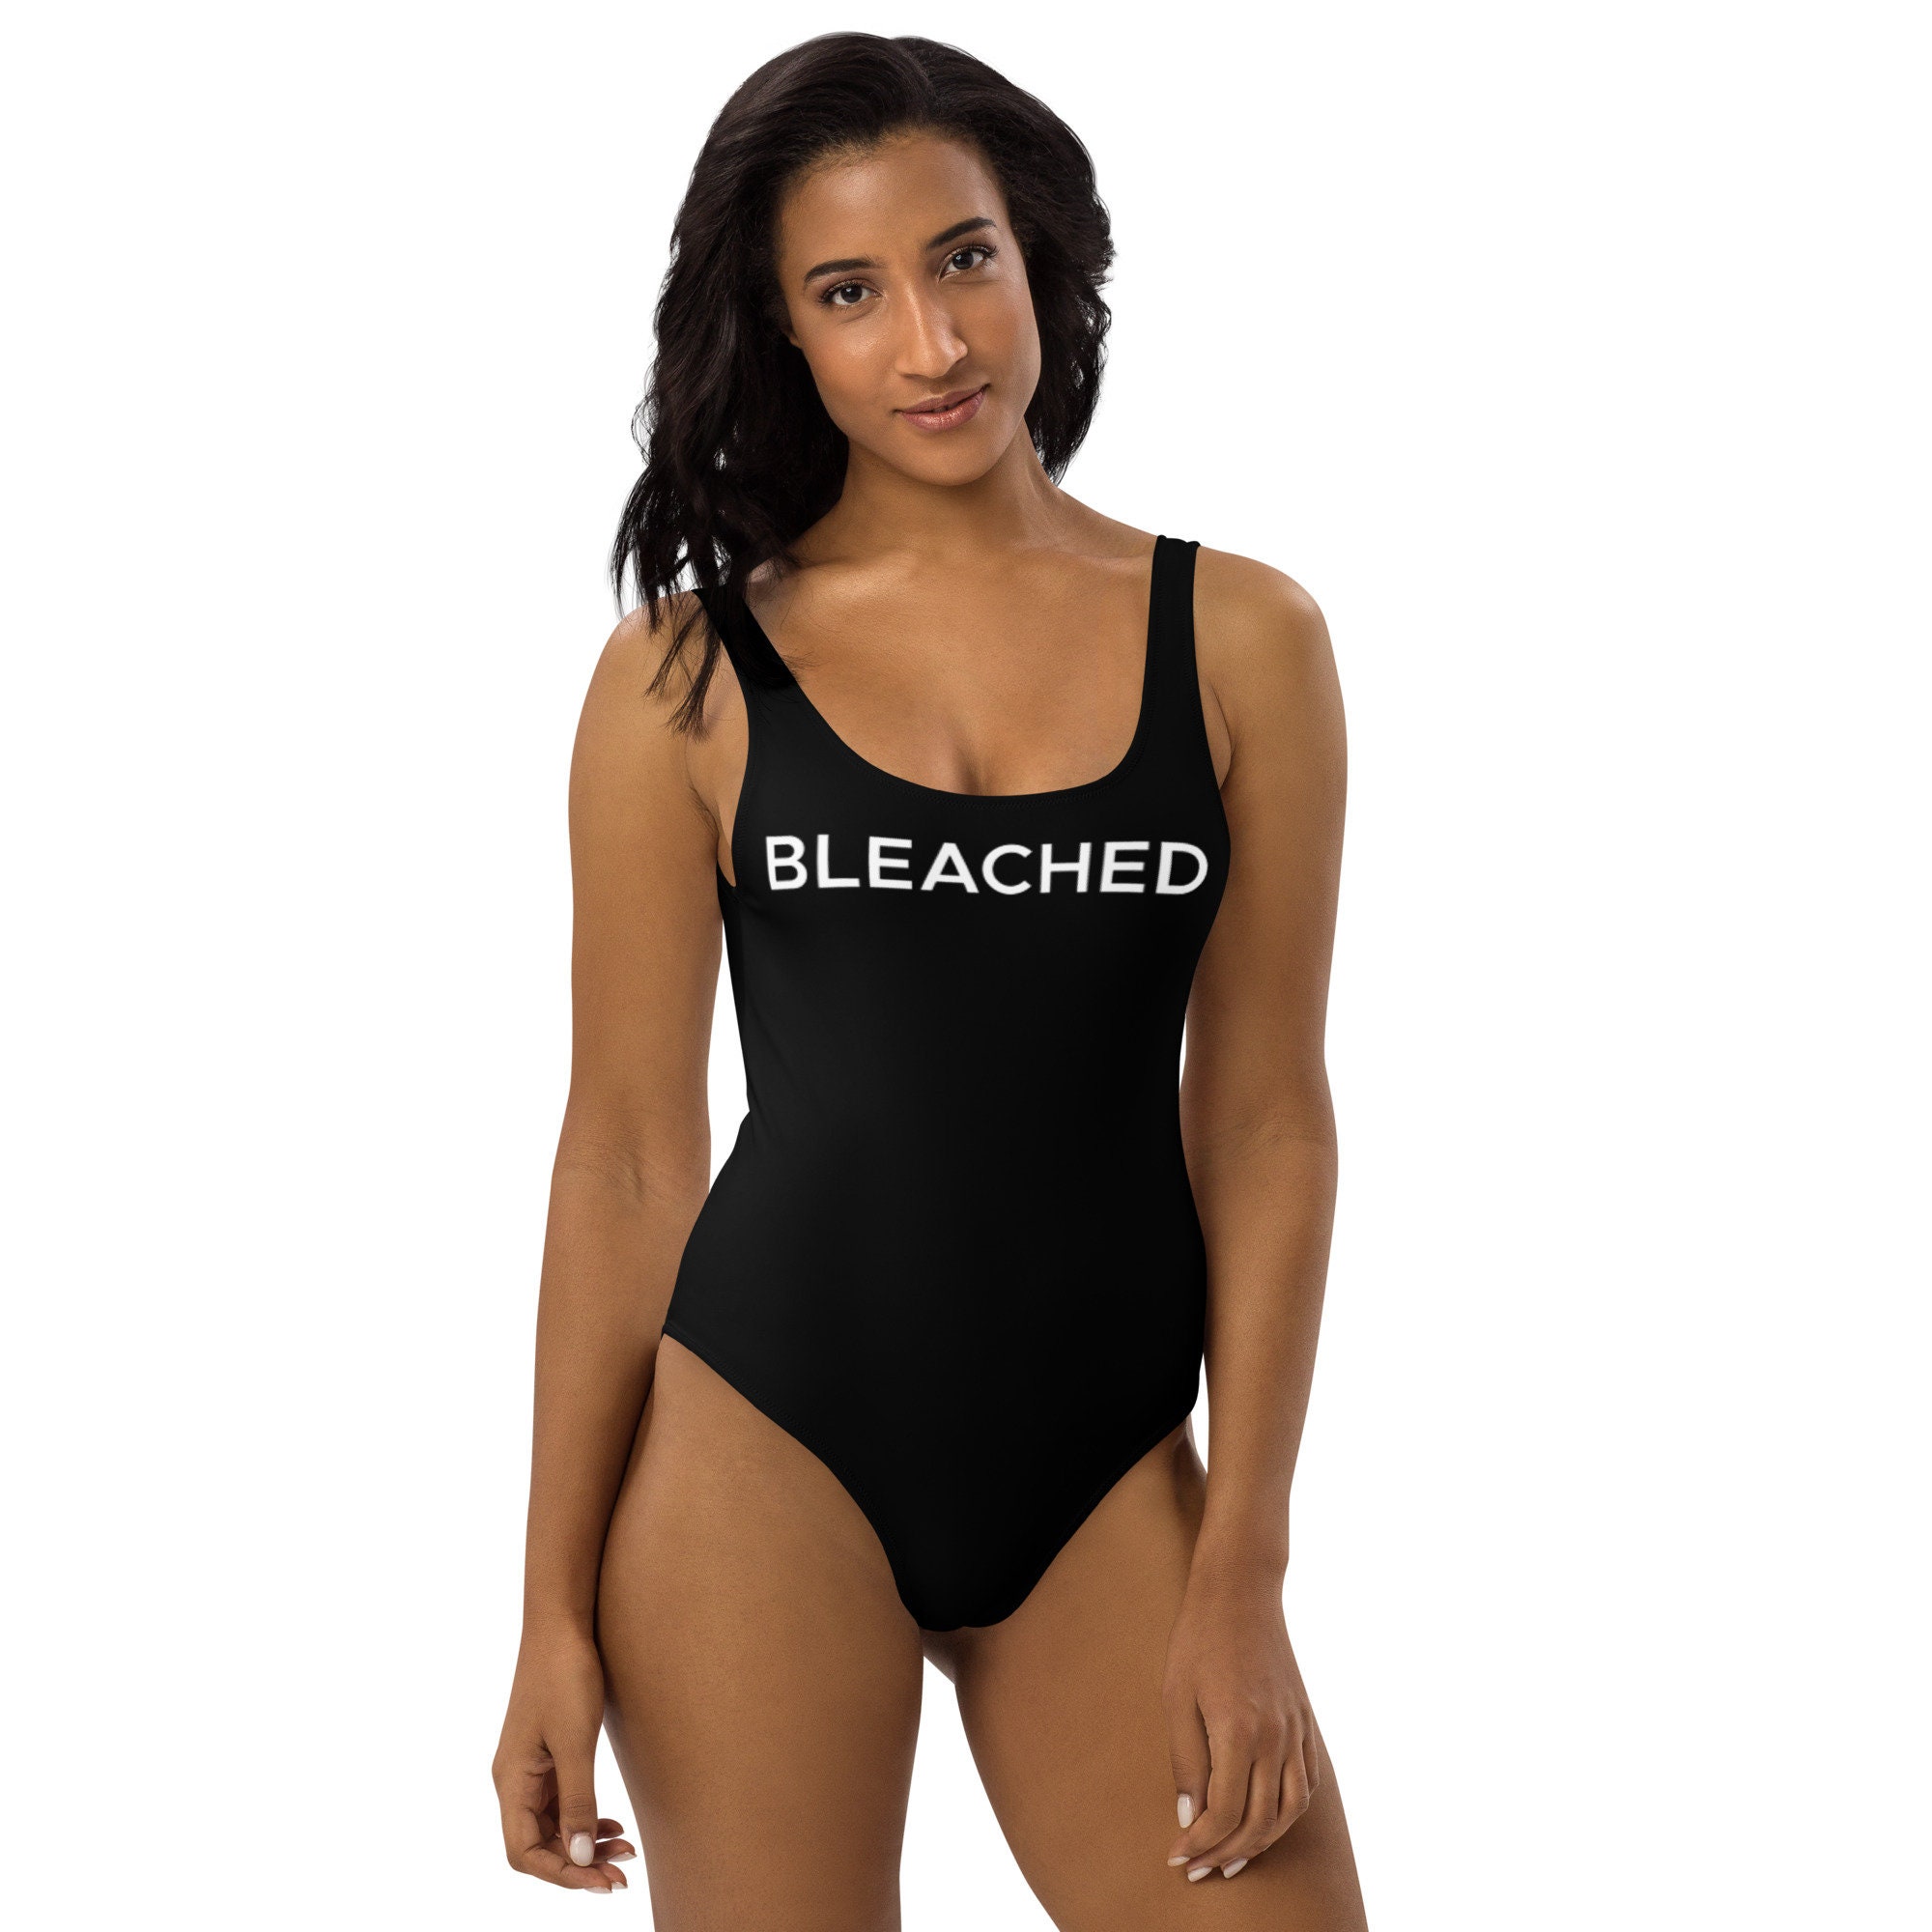 Bleached One-piece Swimsuit, Queen of Hearts Swimsuit, QOH Swimsuit, BWC  Swimsuit, Hotwife Swimsuit, Cuckold Swimsuit, Interracial Swimsuit 